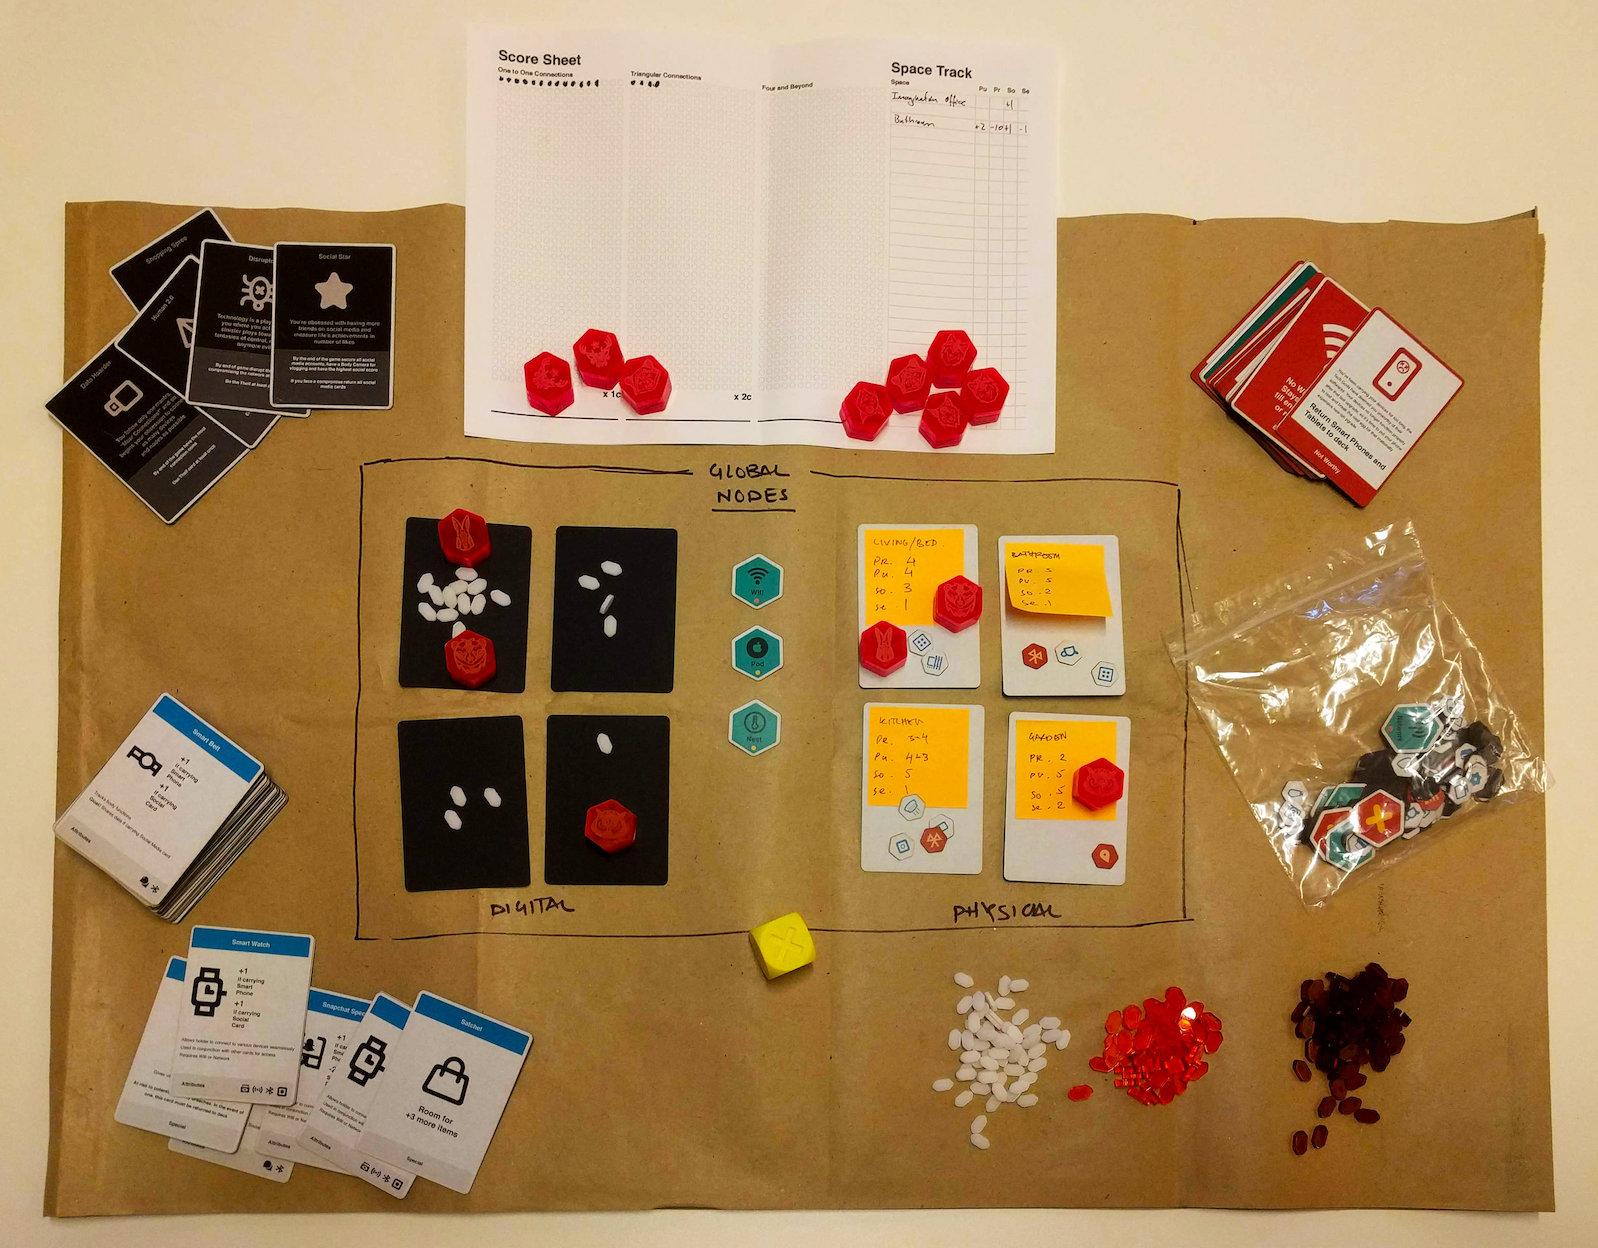 Iterations 1 through 5 used a similar setup more geared towards its research intent over play. The game pieces were designed as workable low-fidelity prototypes and repurposed through iterations